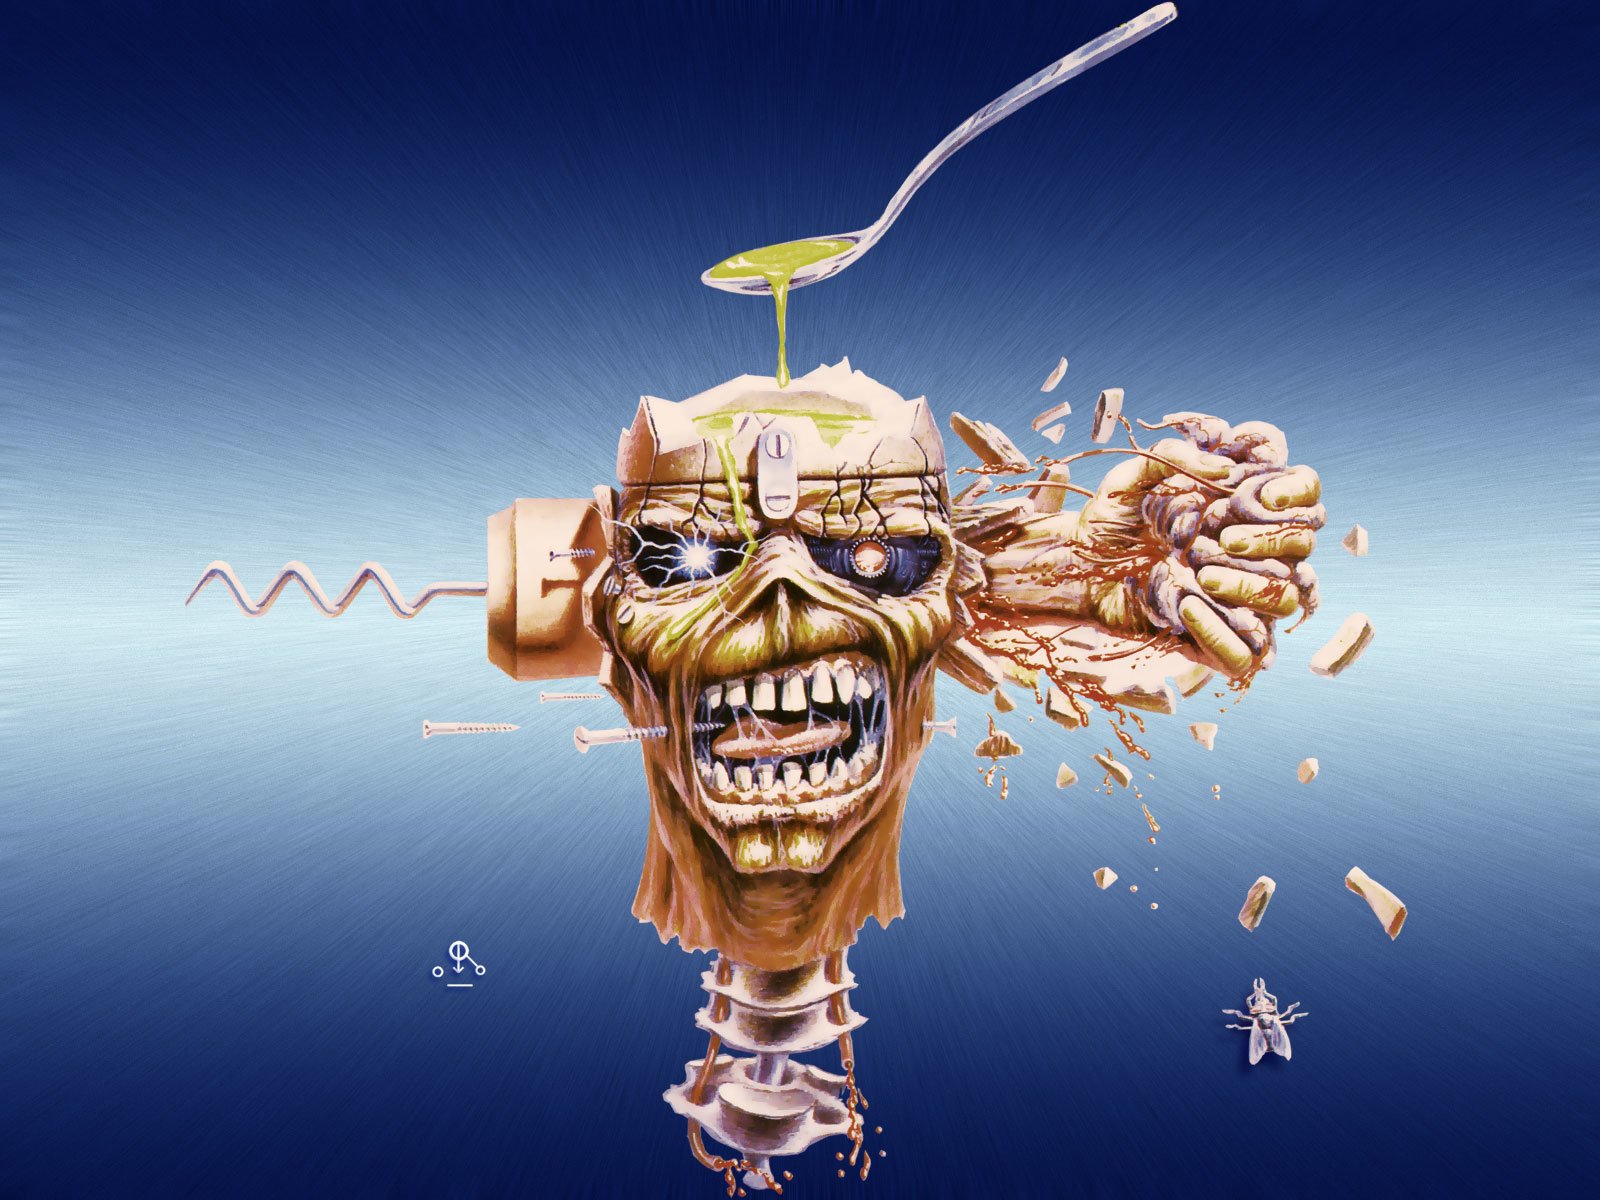 Iron Maiden Wallpaper and Background Image | 1600x1200 | ID:4932